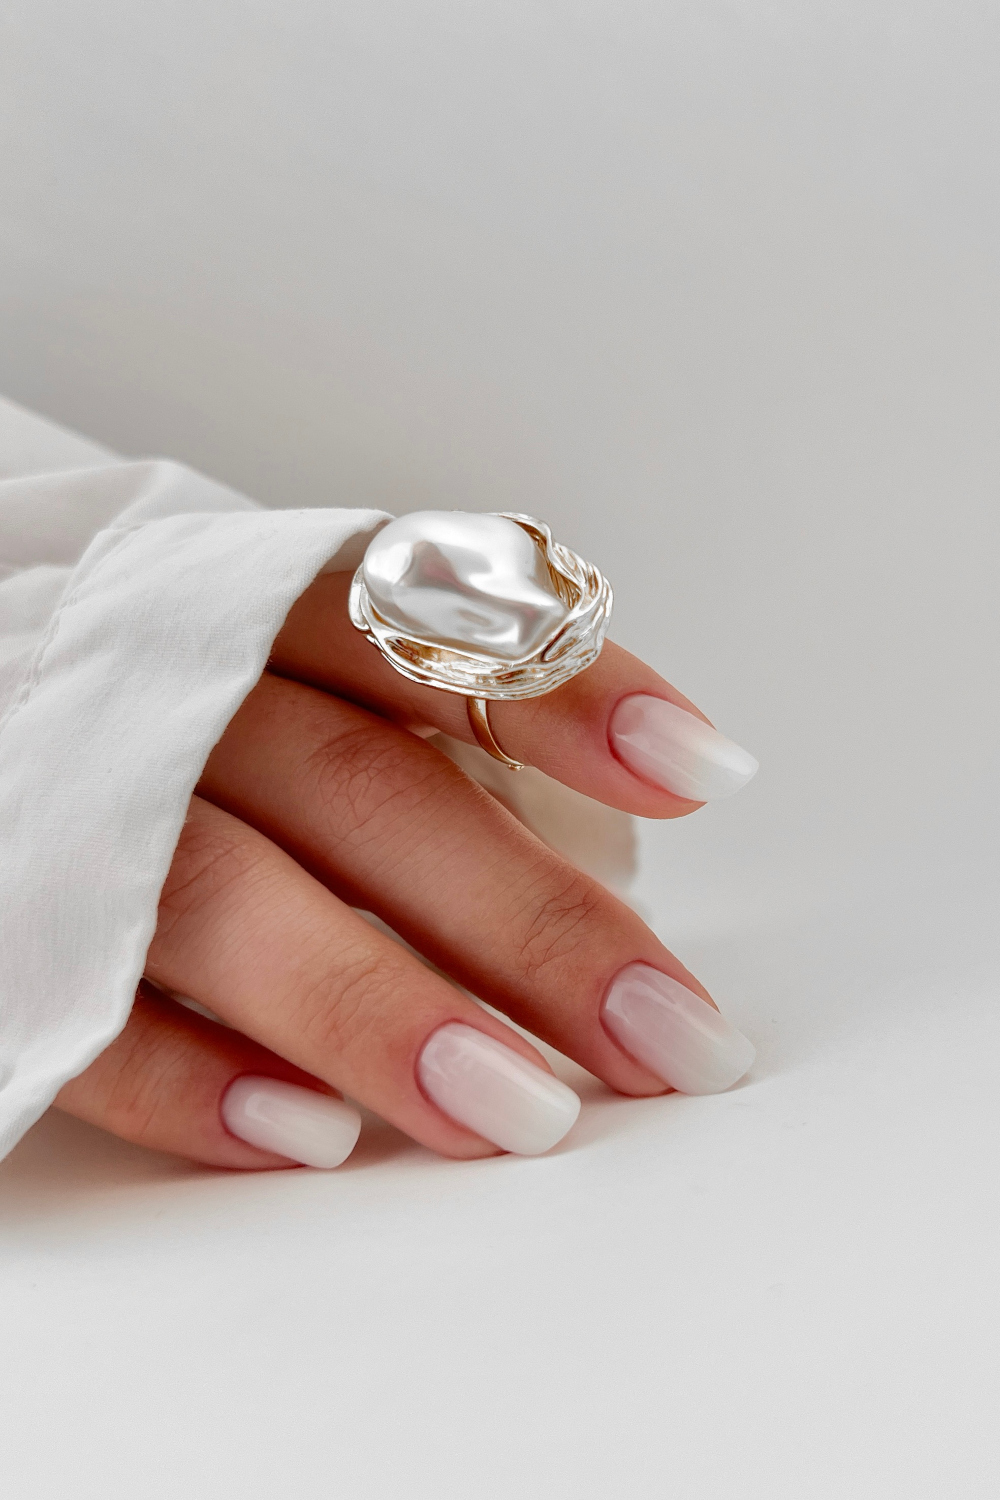 The Sophisticated Set: Pearl Nails Are Trending